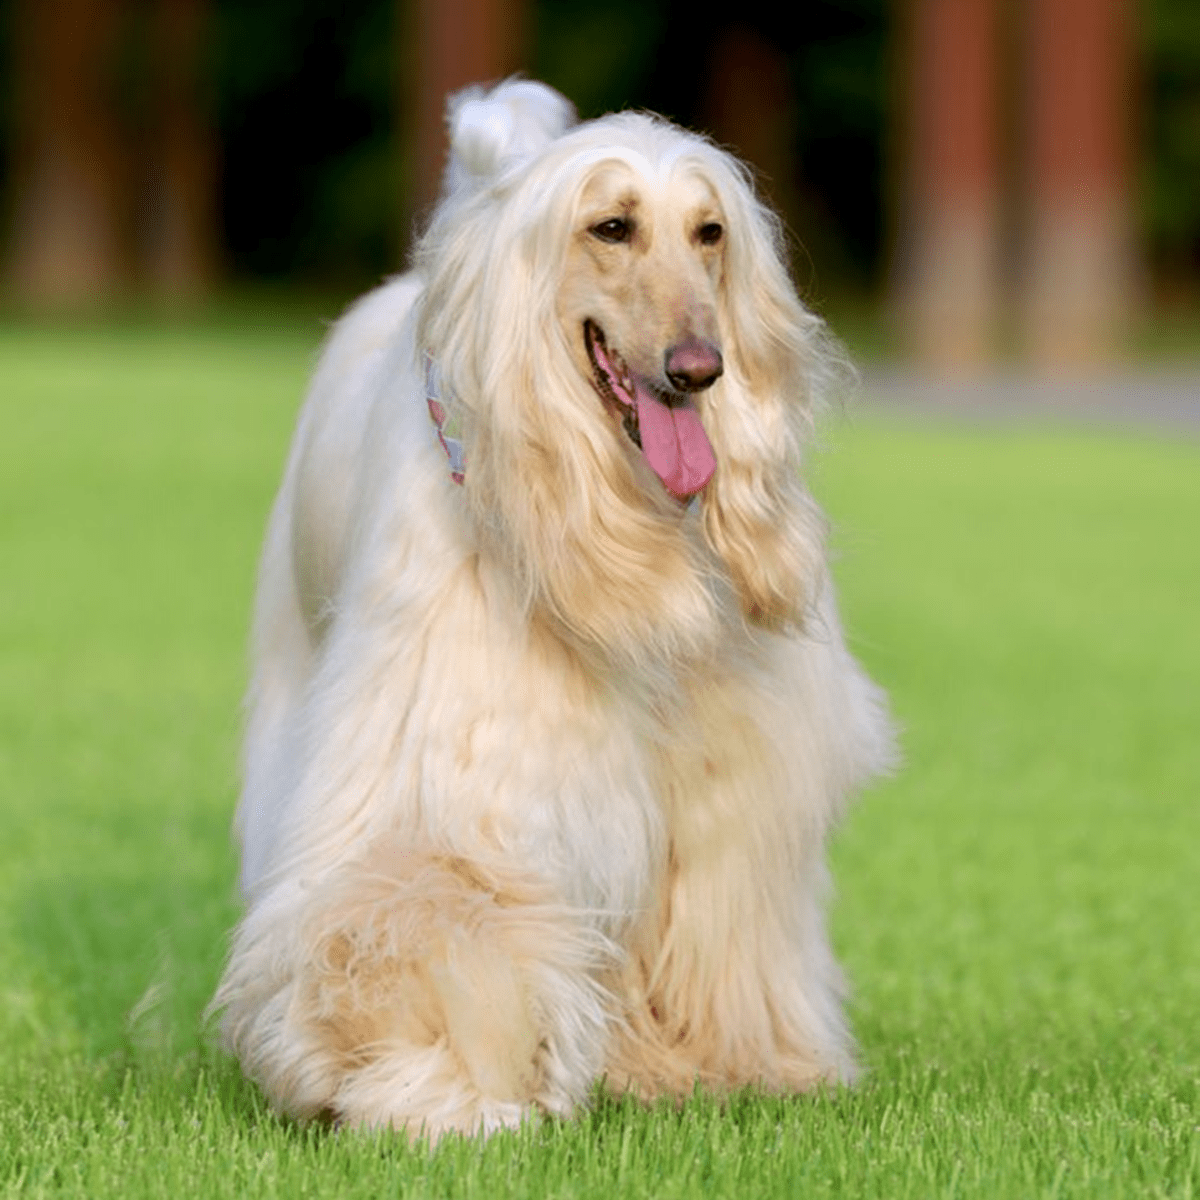 15 Cutest Large and Fluffy Dog Breeds - HubPages